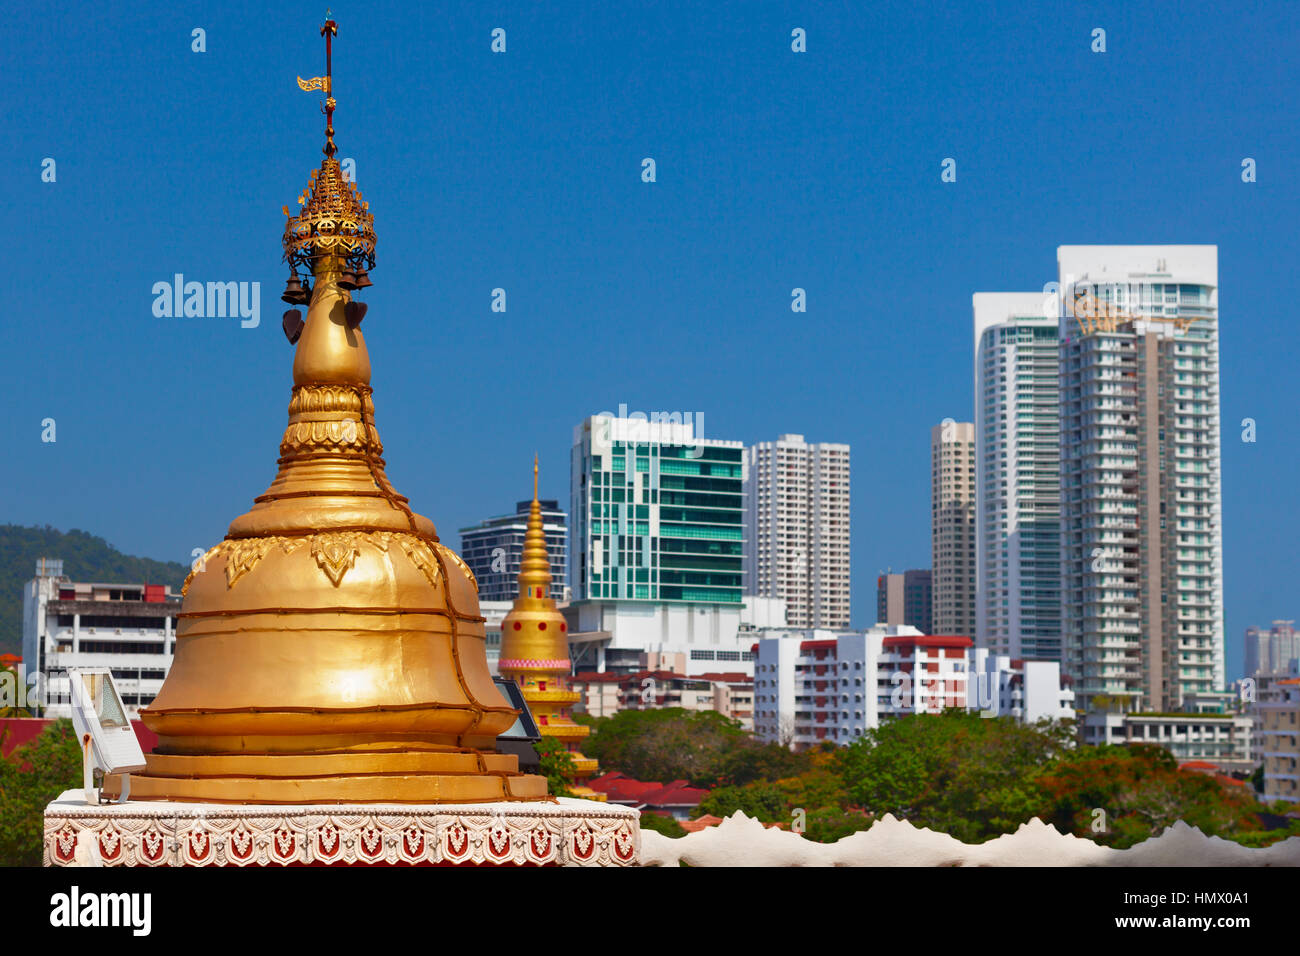 Golden buddhist stupa on modern city buildings background. Pagoda exterior of ancient Burmese buddhist temple Dhammikarama in Georgetown on Penang Stock Photo